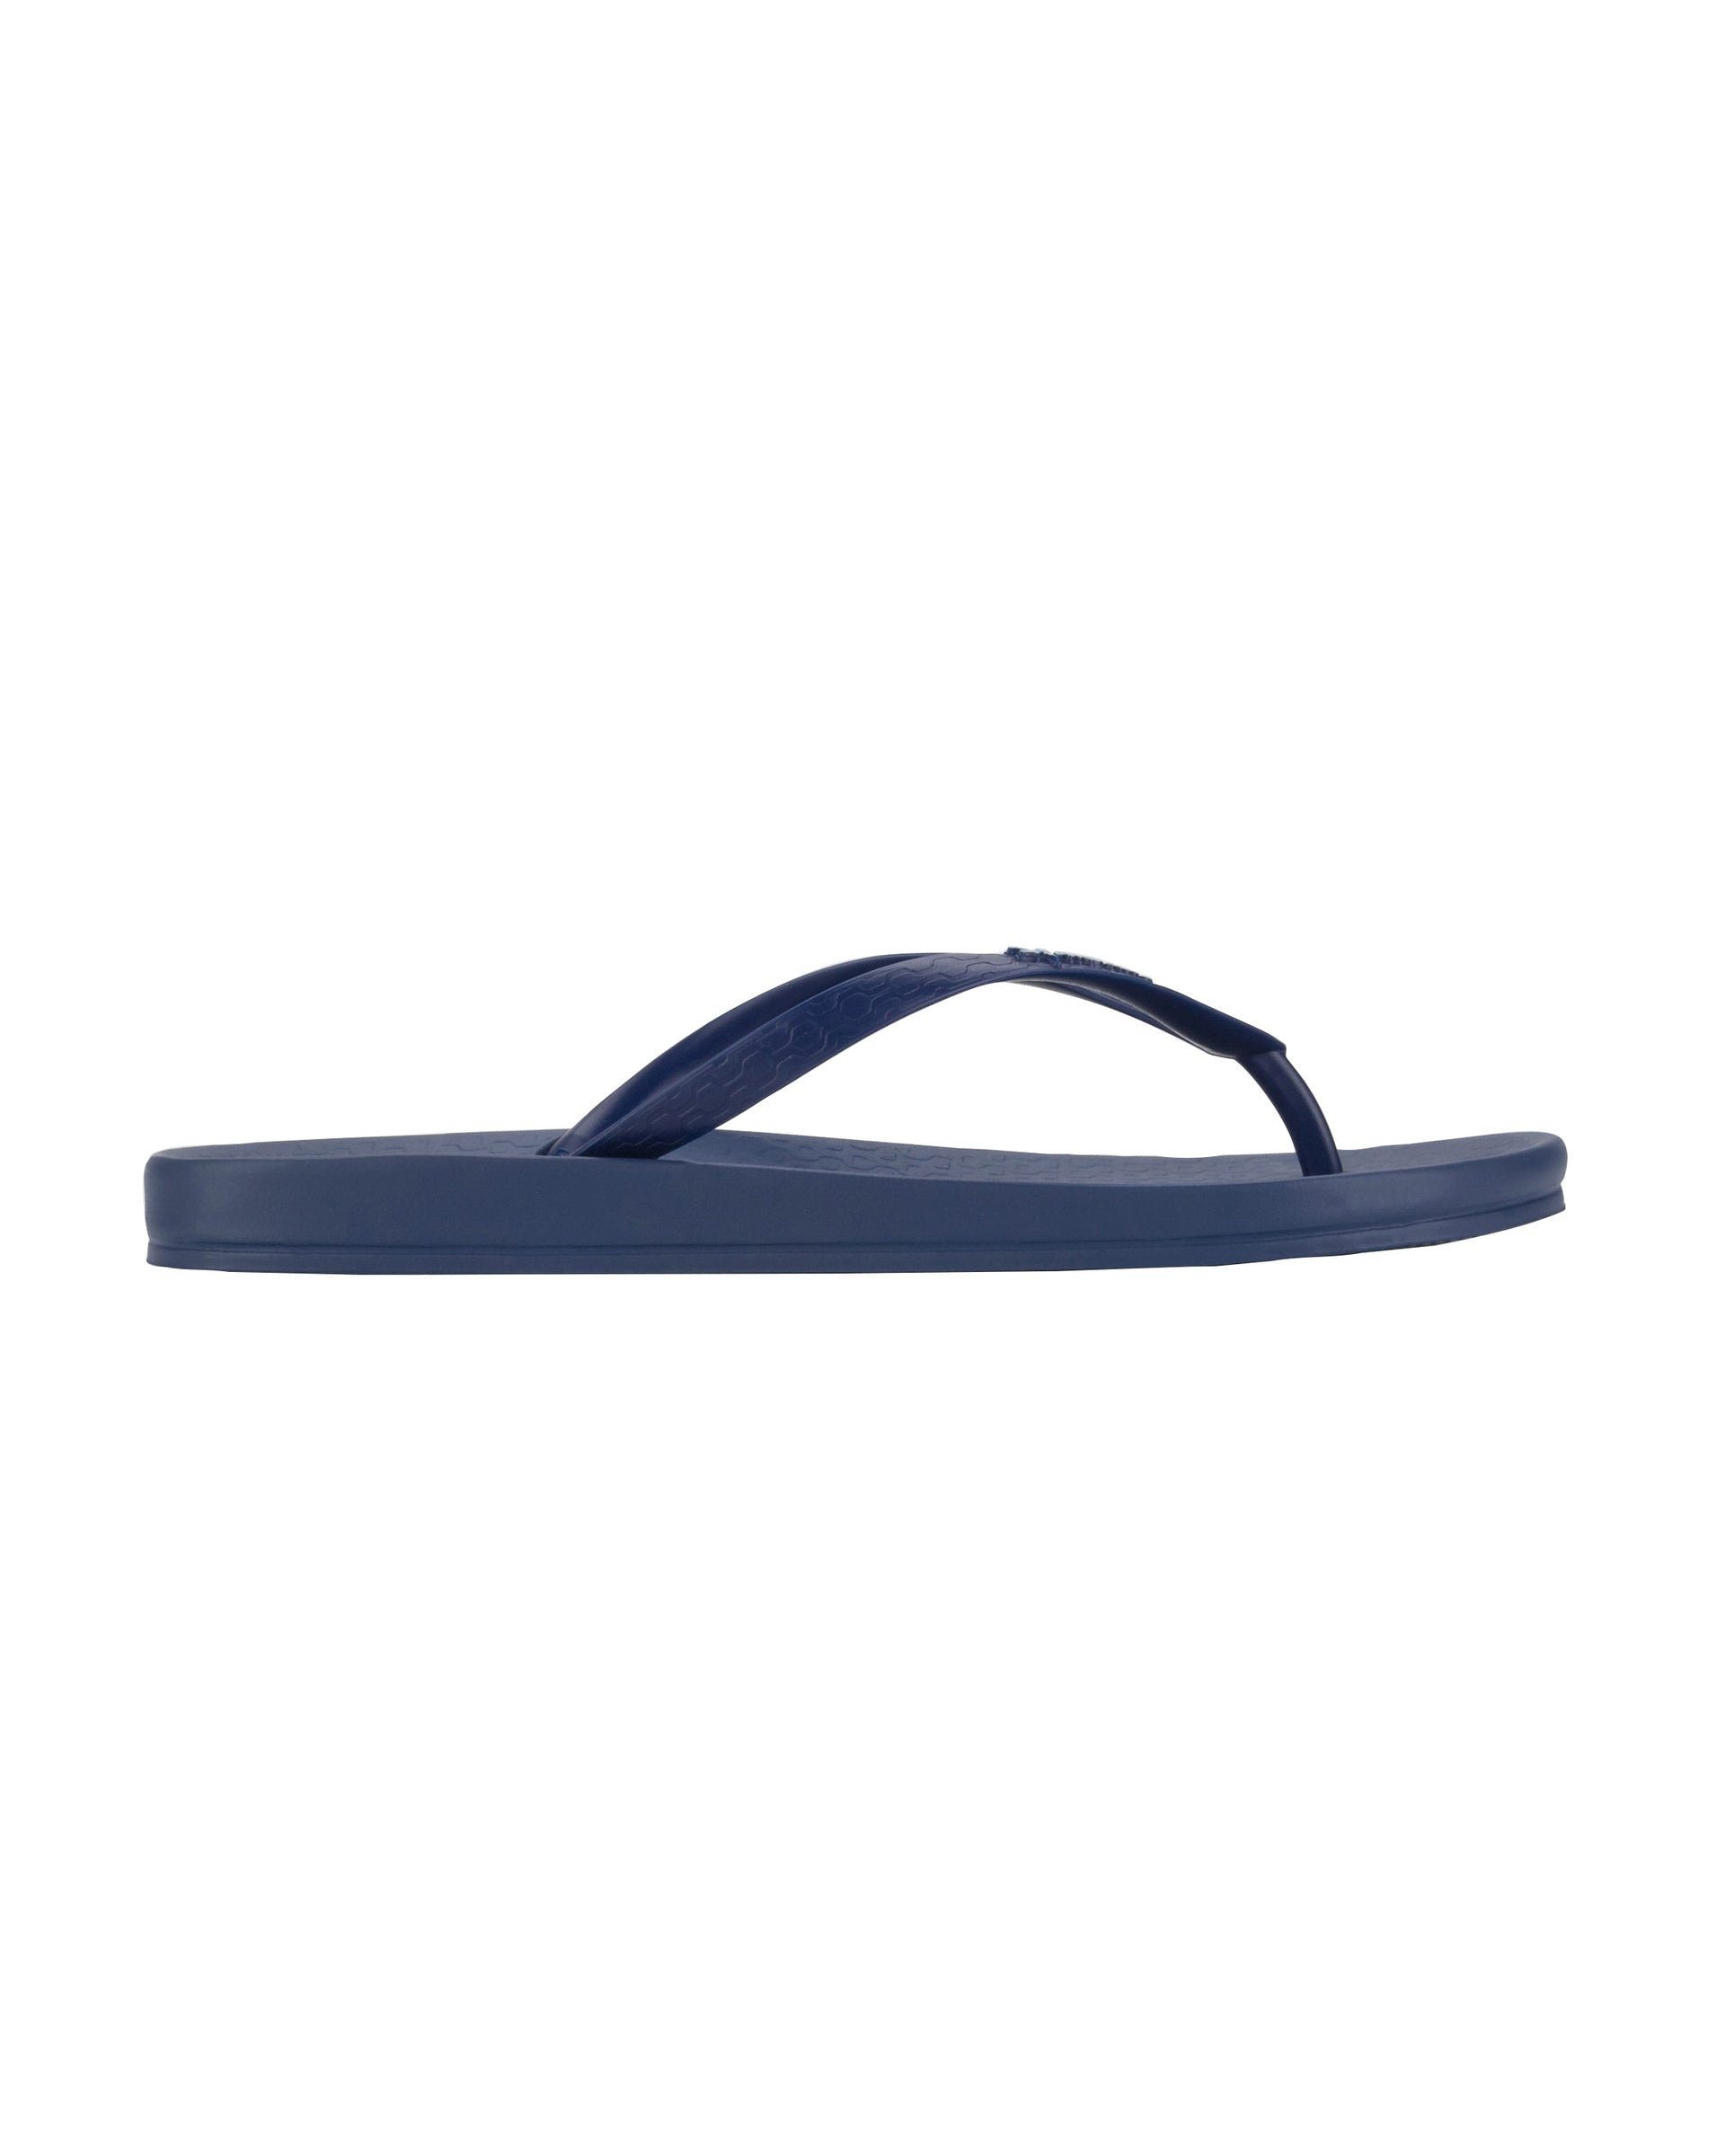 Outer side view of a blue Ipanema Ana Colors women's flip flop.